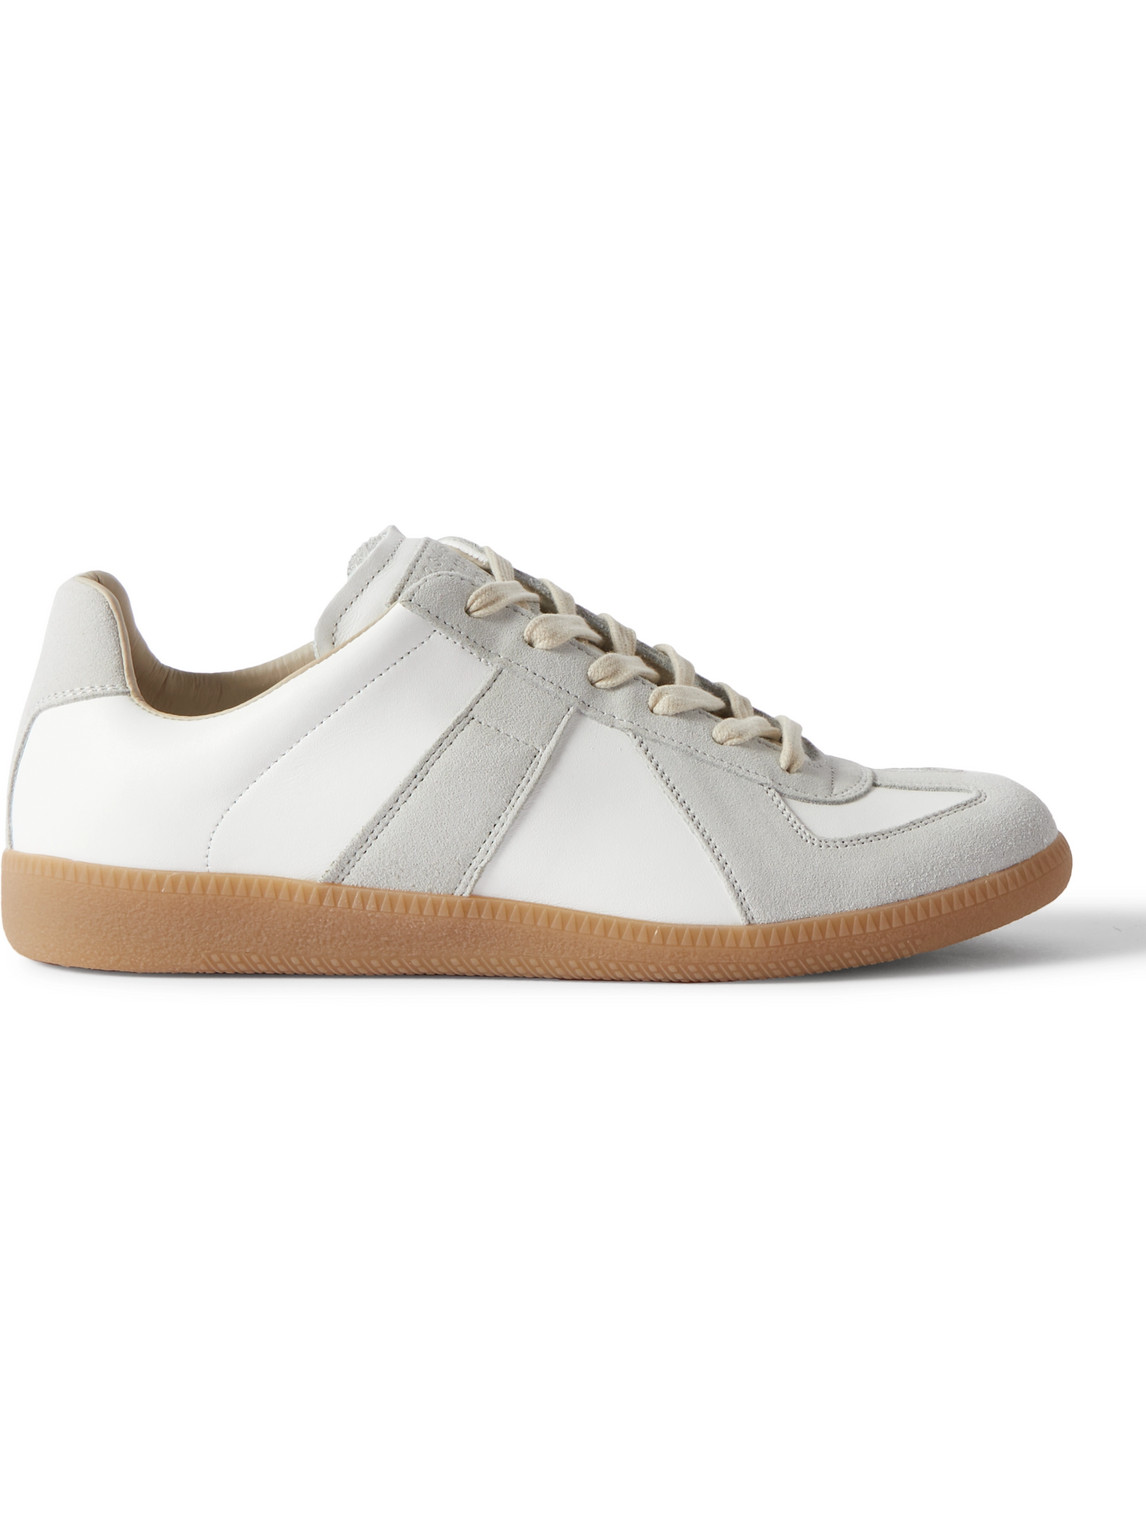 Maison Margiela - Replica Leather And Suede Sneakers - Men - White - EU 39  voor mannen